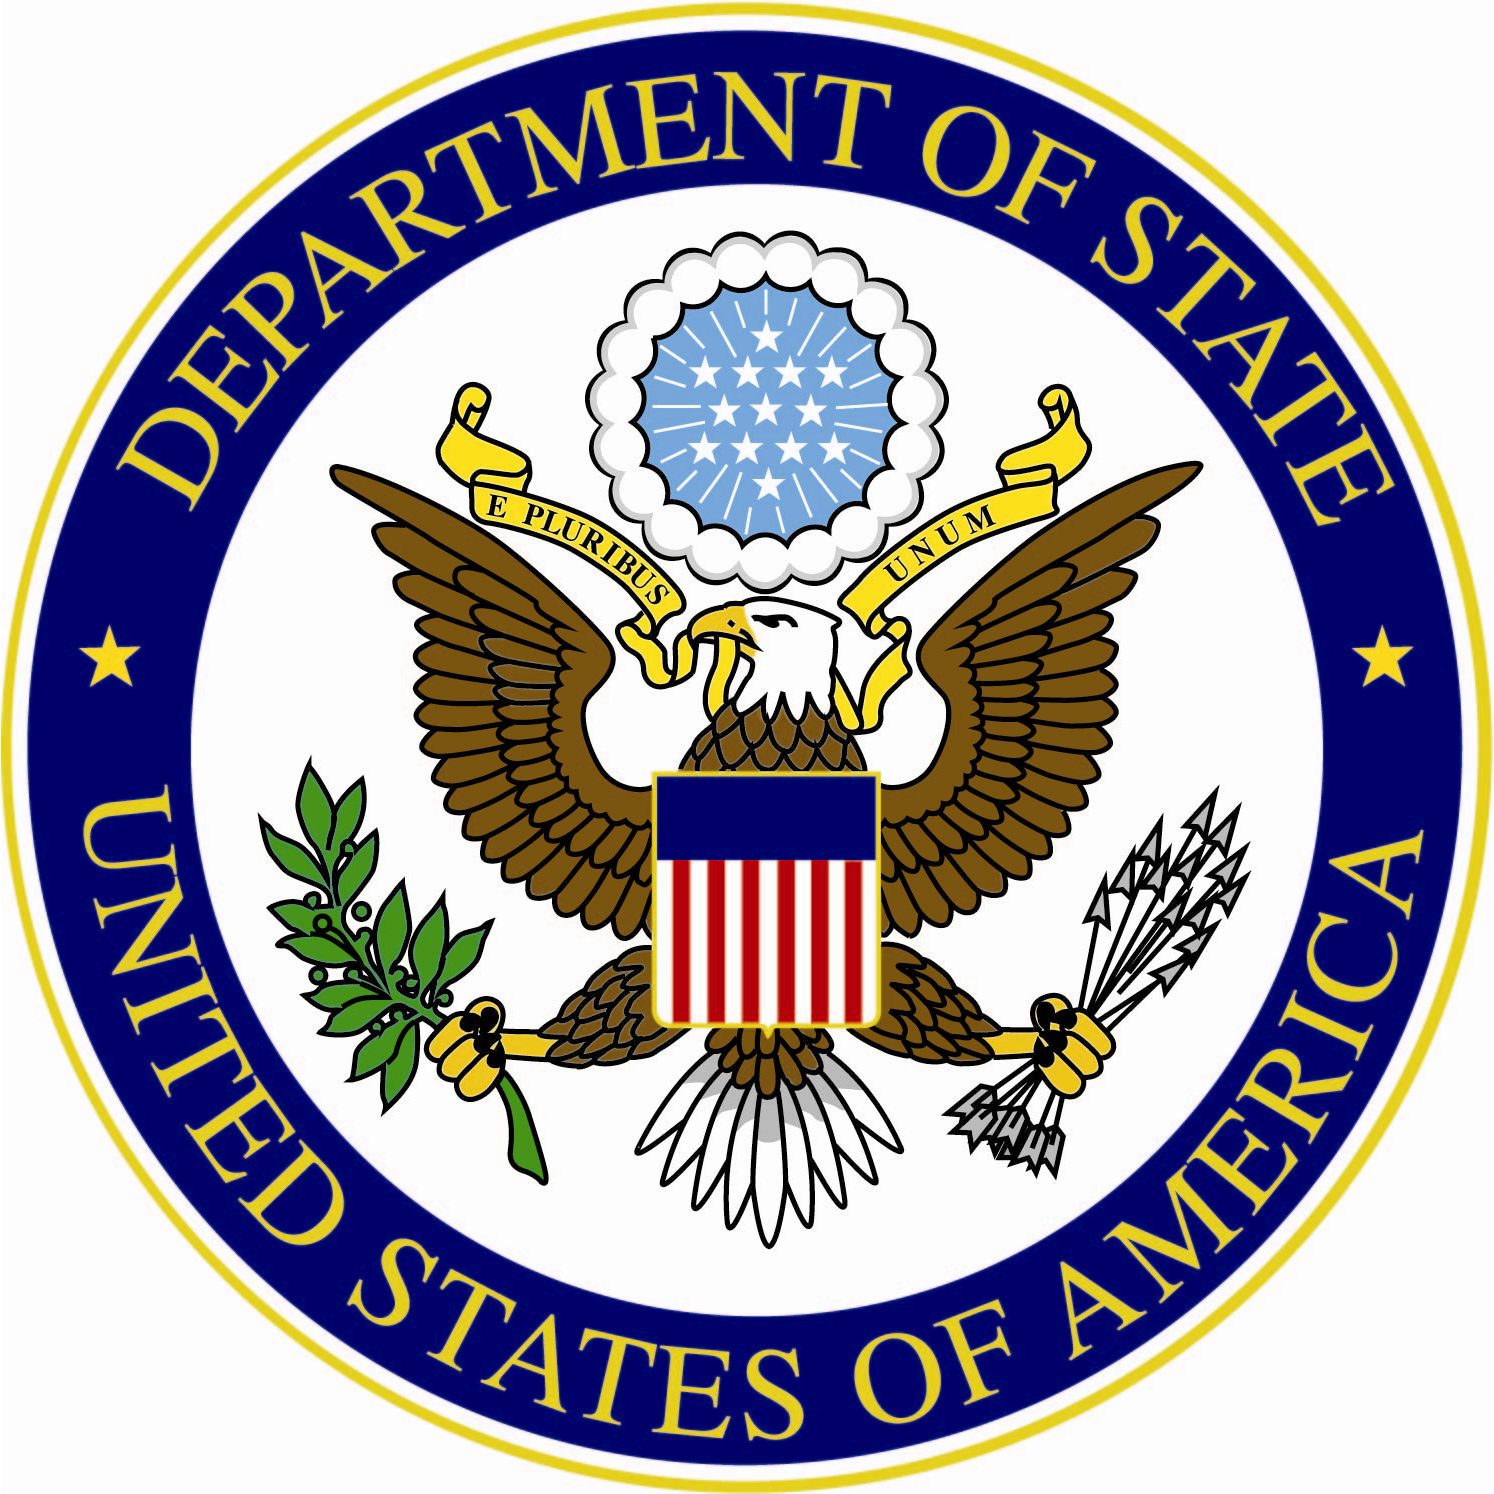 United States Embassy in Addis Ababa Launches Academy for Women Entrepreneurs 2022